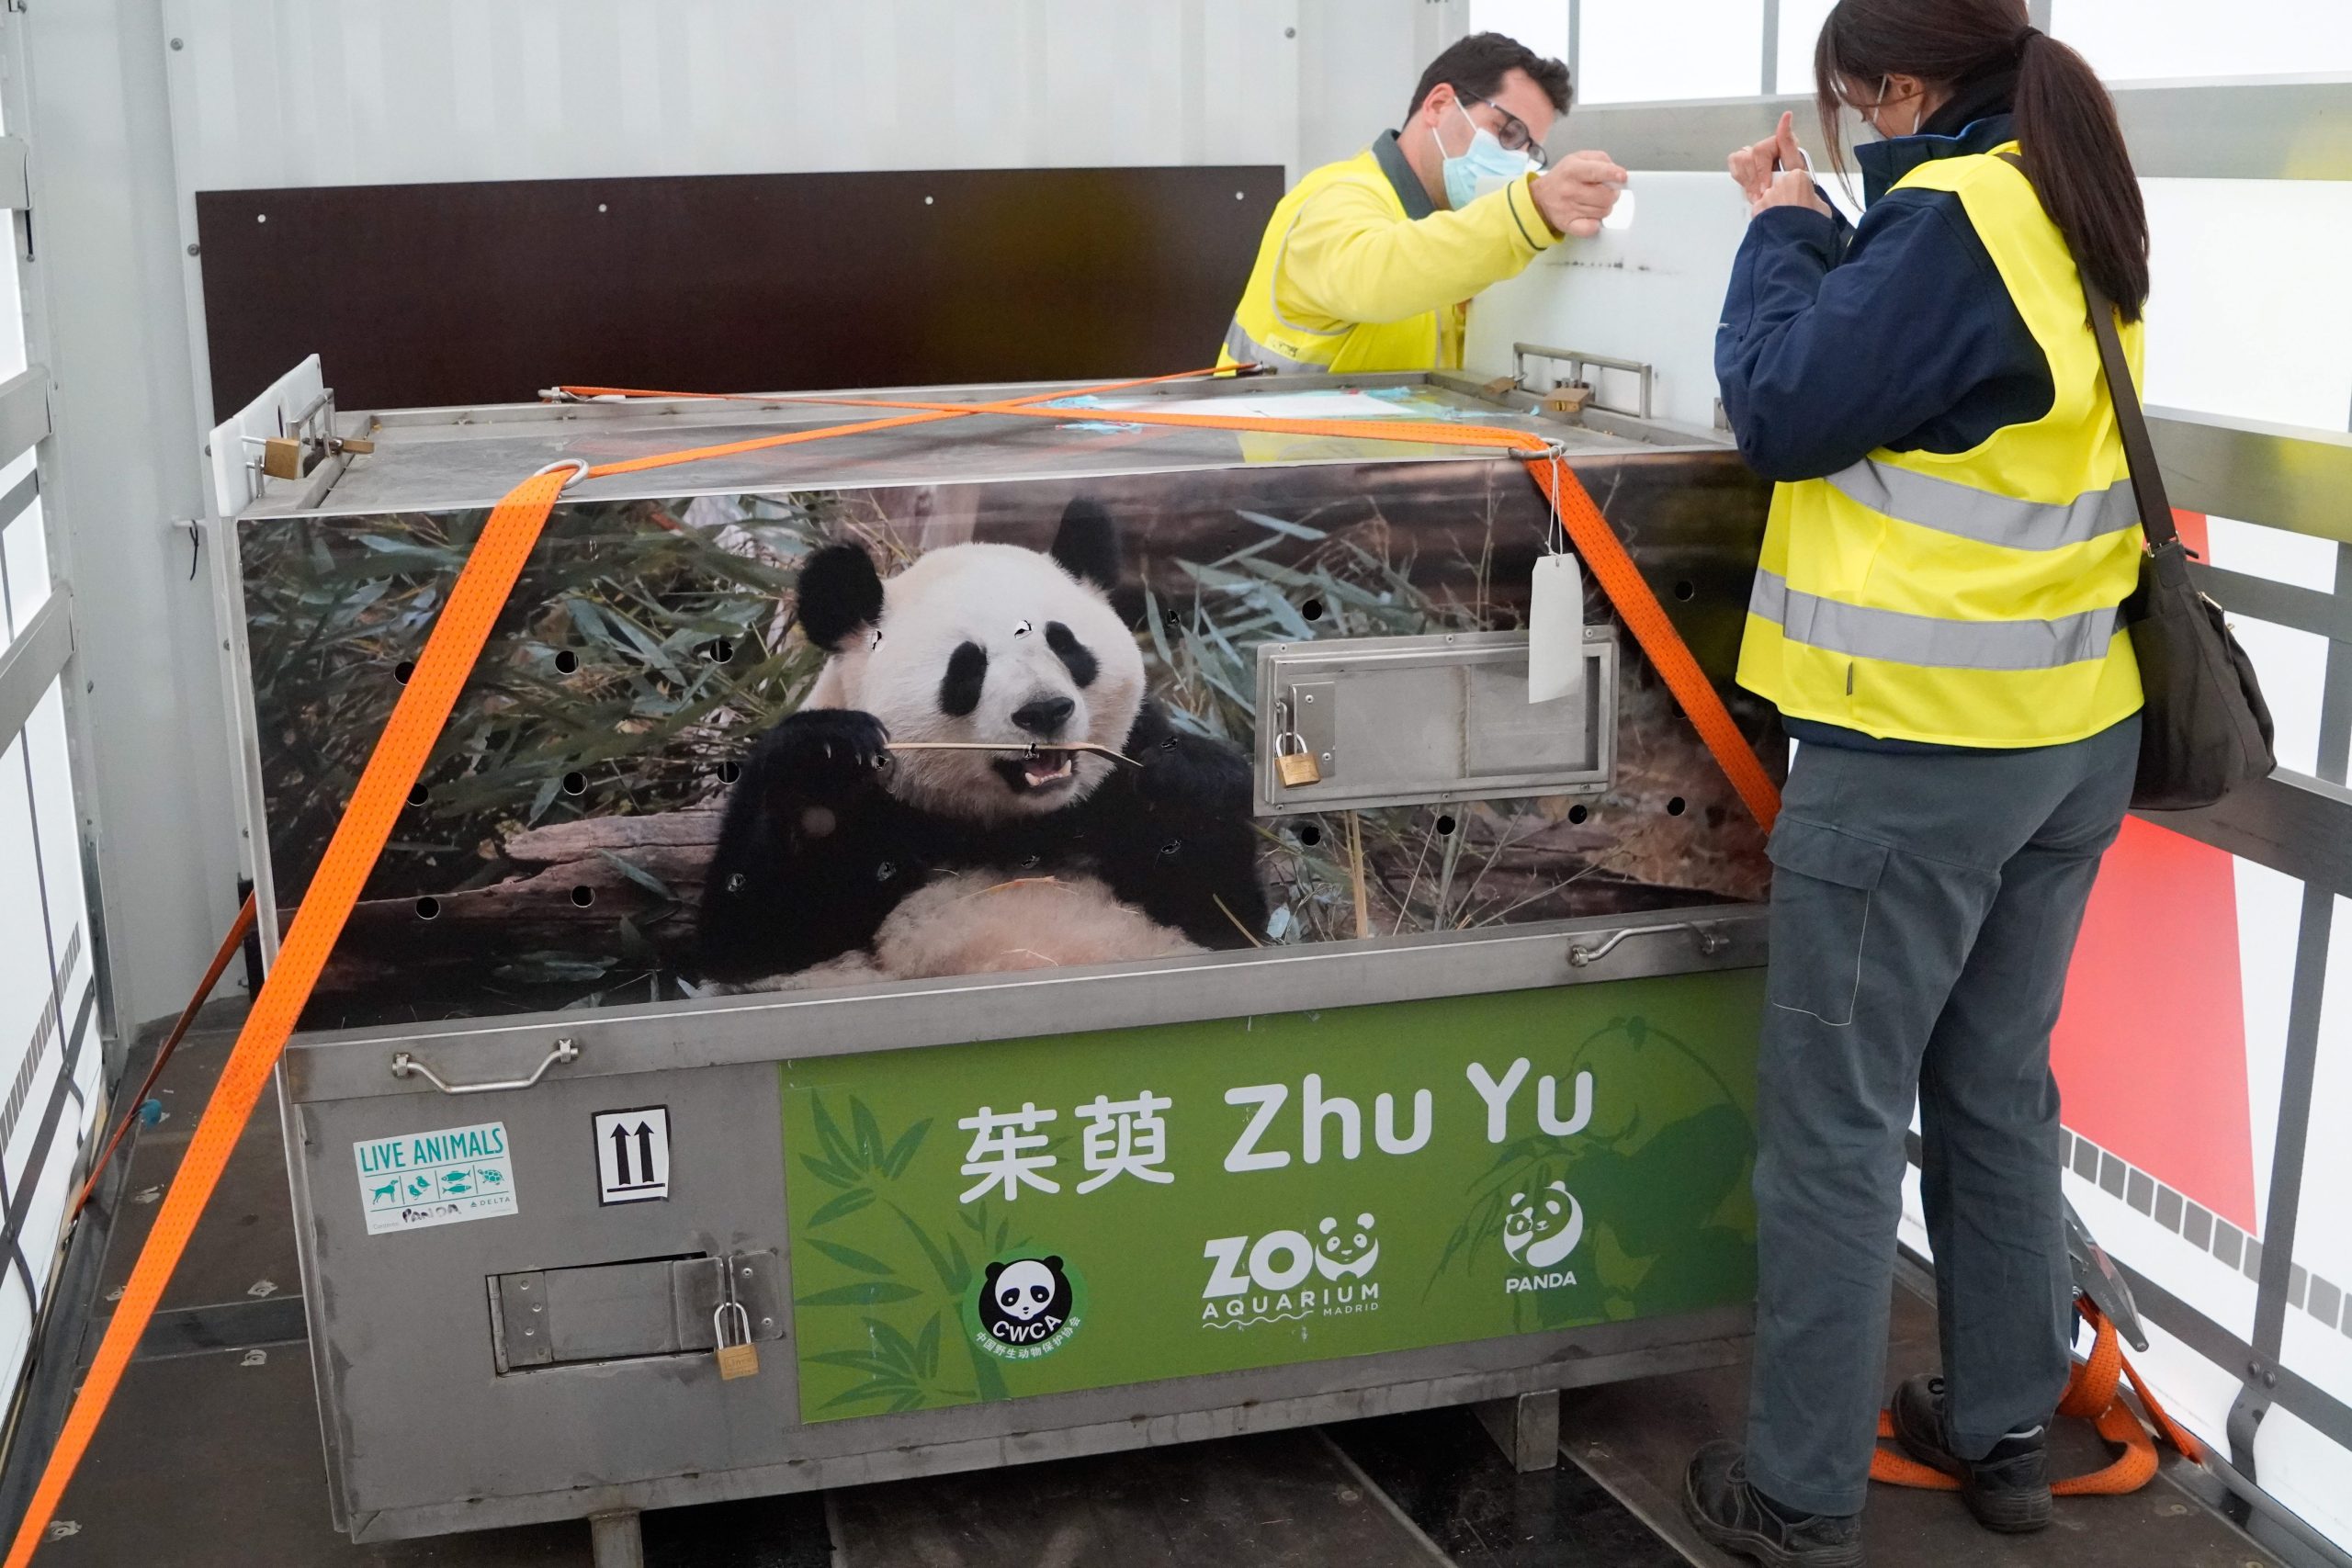 Adorable panda couple land in Spain from China: Jin Xi and Zhu Yu will spend the next few years at Madrid Zoo [Video]